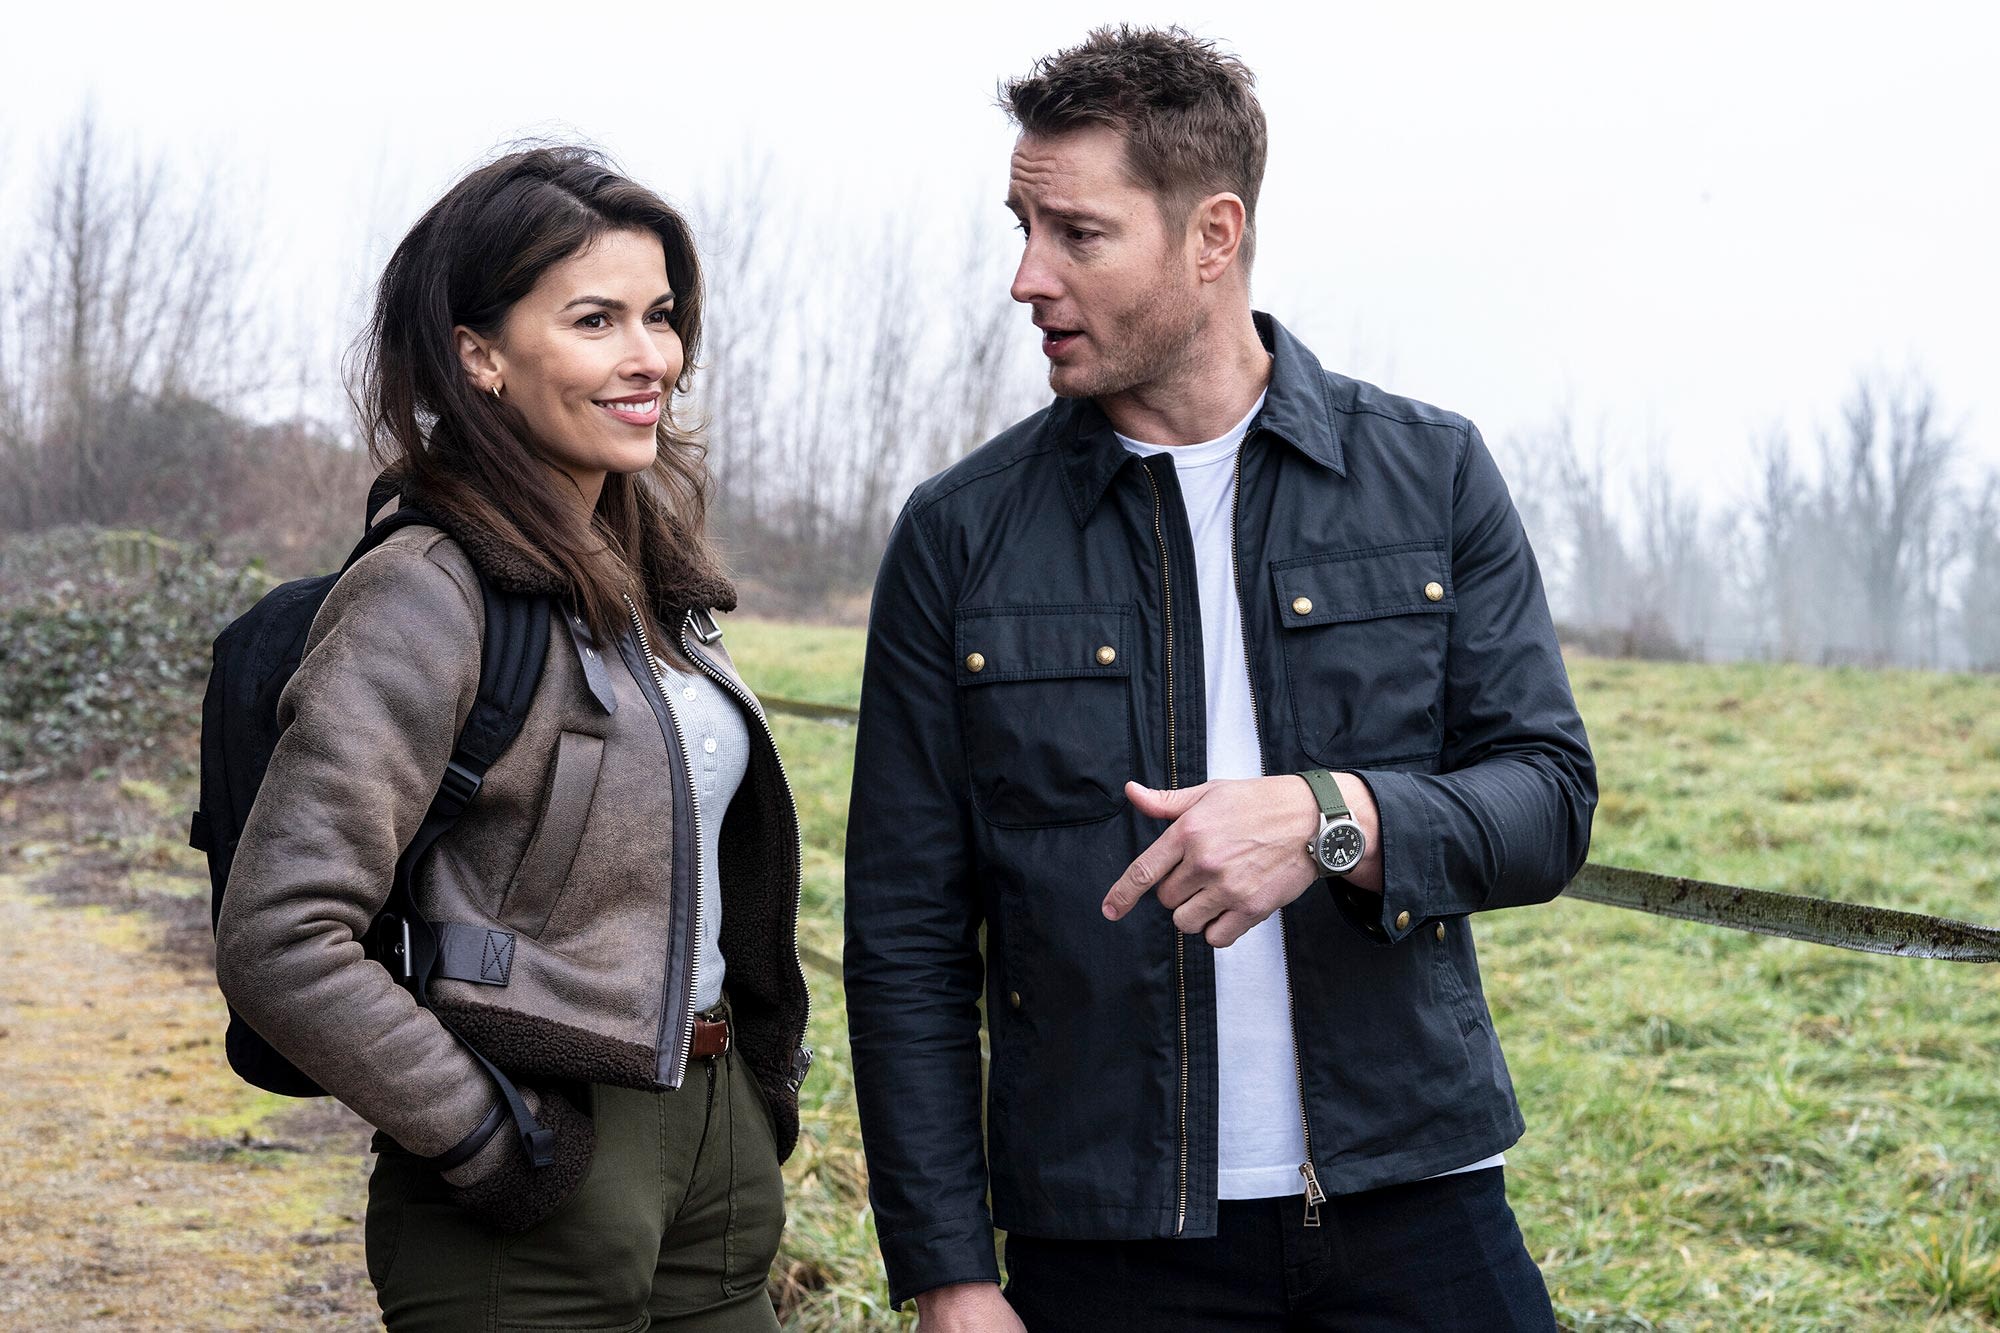 What to Know About Season 2 of Justin Hartley’s Hit Show ‘Tracker’: Sofia Pernas’ Return and More